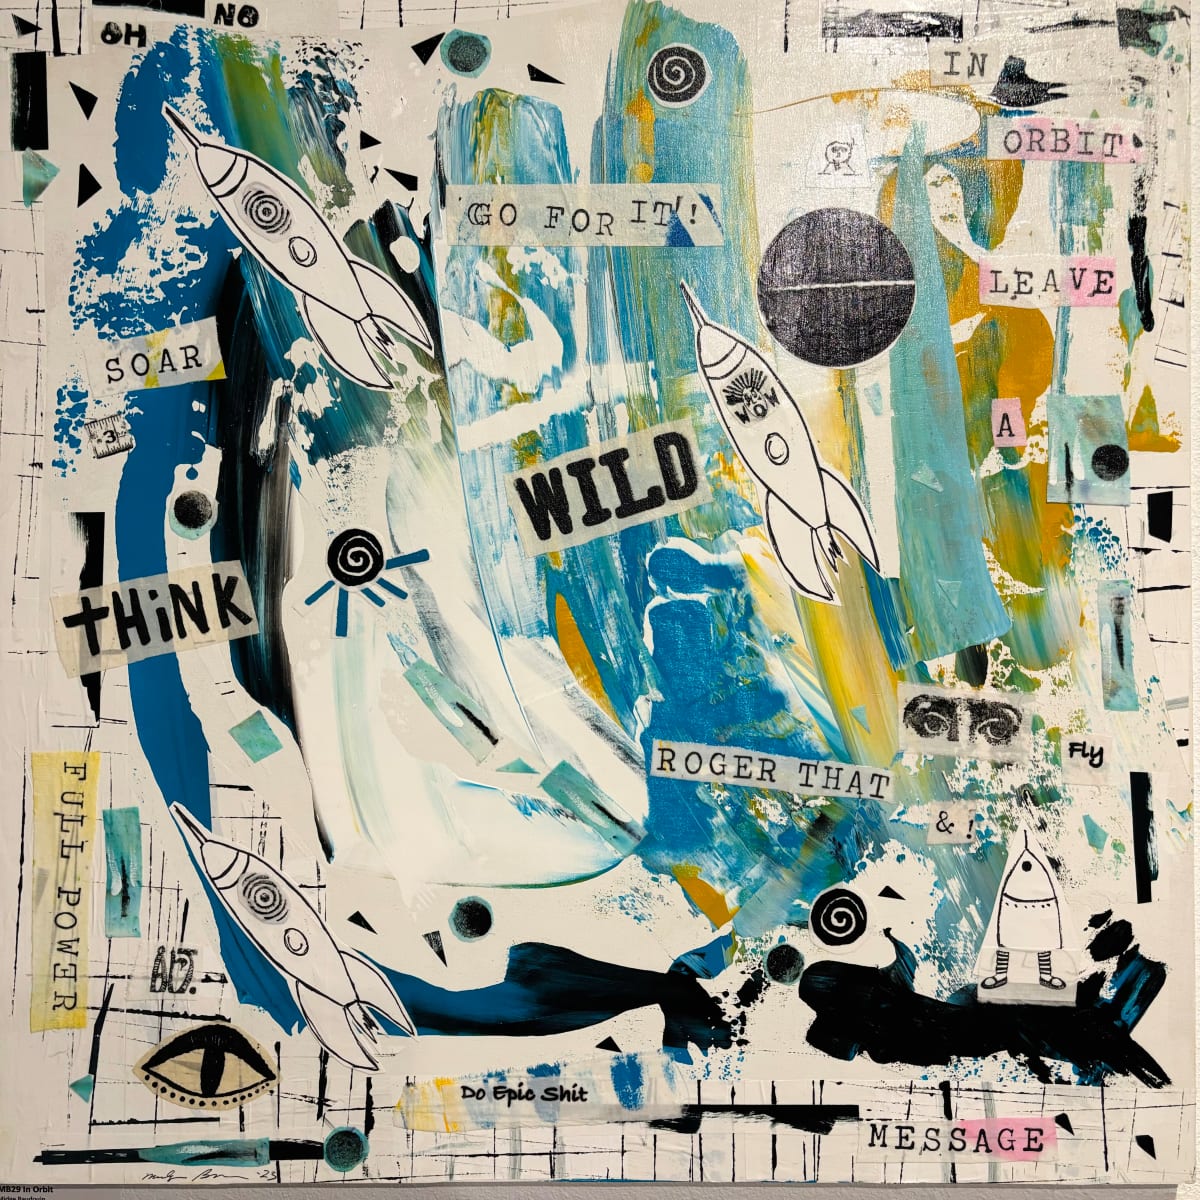 MB 29 In Orbit by Midge Baudouin by Derek Gores Gallery  Image: Artist Bio about Midge Baudouin: 
Love and art. Art and love. For me, they have always been intertwined.
“I love to make art. I love to teach art. I love to give art. I love to see art. I love to support art.”
Midge’s life as a maker started back during her childhood in New York City (the Bronx) when, with few resources, she and her friends
improvised with materials from empty lots and construction sites to make things from their imagination. When the public school offered free arts and crafts, Midge learned embroidery and woodworking. She was also entrepreneurial, selling handmade pot holders and lanyards to tenants in her apartment complex.
Midge followed that spirit of creative ingenuity into adulthood, always learning and practicing — she was a macramé genius — eventually making a living teaching and selling art supplies for various companies.
“After being a sales executive for a major woodcraft company for many years, I took off my make-and-take-it apron and put my creativity into selling products worldwide. It was a different form of creativity, but the core was always the creative process of art and craft and making things.
“In retirement, I have been able to throw myself, morning, noon, and night, into my artistic process. Every single day. It is a lifeblood thing now. Maybe it always has been, but certainly now I’m tapped in.”
Mixed media and collage have been my métier for many years, keeping that spirit of improvisation from my youth.
“I love the idea of working with complete abandon — with no rules, no planning, and no thinking — just doing it organically. Whatever comes. The surprises. My favorite artists are Picasso, Matisse, Basquiat and 3 year olds. I am inspired by Gee’s Bend. And more recently, Rosie Lee Tompkins. Learning about Rothko and participating in a global network called Art2Life/Spark. Self- expression and imagination are key, using what’s available to make something. Turning something old into something new is always fun.
When I learned surface design silk screening, it became another game changer in fabric collaging. I love nature. Mother Nature paints us a new picture in 3D living color. All we need to do is look out and see it,” Art has taken on new and deeper meaning for Midge. Knowing she is not alone on her artistic journey sustains Midge as she keeps living a creative life. “I believes art and artists connect us all”.
“Art and artists live on and inspire and leave a story and history. From the beginning of time, expressing visually has resonated [with people], and it remains a piece of humanity. It brings us closer together, the same with music. We are on equal footing. No words are needed to communicate to the soul, mind, and senses. There is a rhythm and a pattern.”
“When creating my art ‘in the zone’ — many times it feels like a silent symphony with my eyes. There is the beginning, the middle, and the
crescendo,” she said.
“Life. It’s a crazy thing. We are left as survivors of our times, our decisions, our truth. The loss of our loved ones, and the legacy they leave. Our art. How we spend our time. Let’s leave the world a little kinder and gentler and a little more beautiful than the day we showed up.”
It’s an honor for me to show my work at Derek Gores Gallery. This is a magical place.